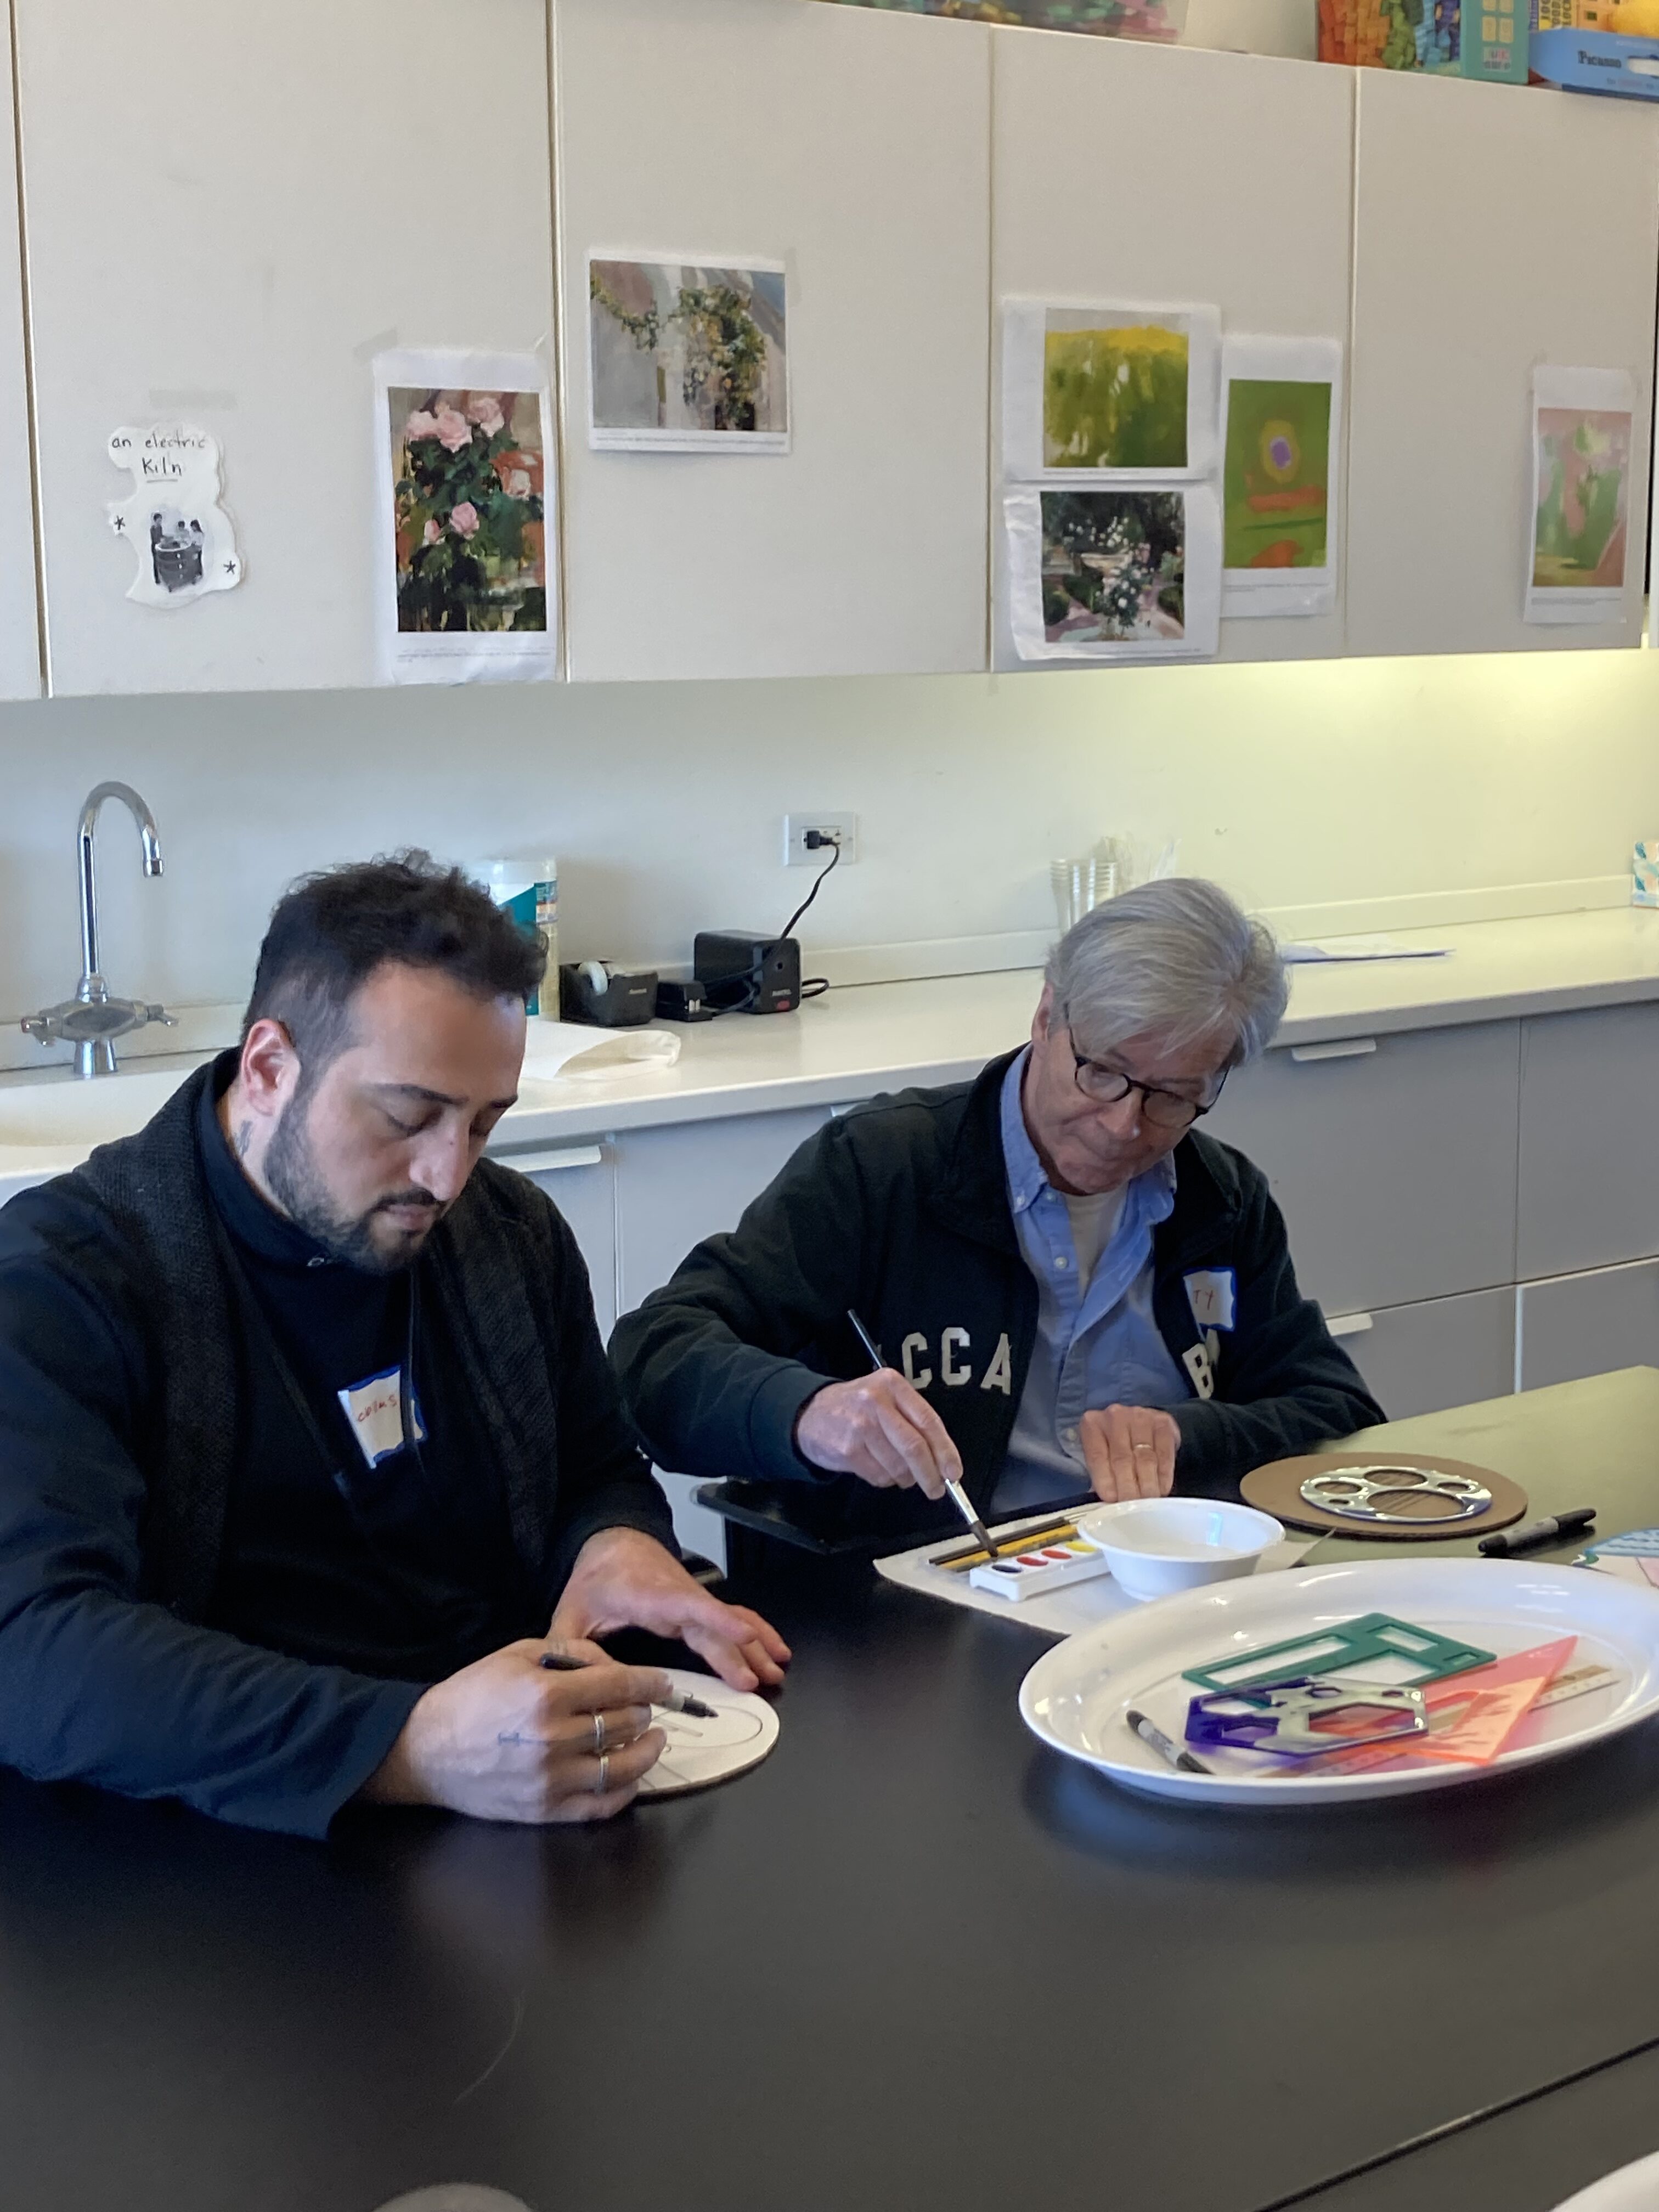 Scenes from a recent Paint at the Parrish class, an arts program designed specifically for individuals with Parkinson's Disease and their care partners. COURTESY CENTER FOR PARKINSON'S DISEASE, STONY BROOK, SOUTHAMPTON HOSPITAL